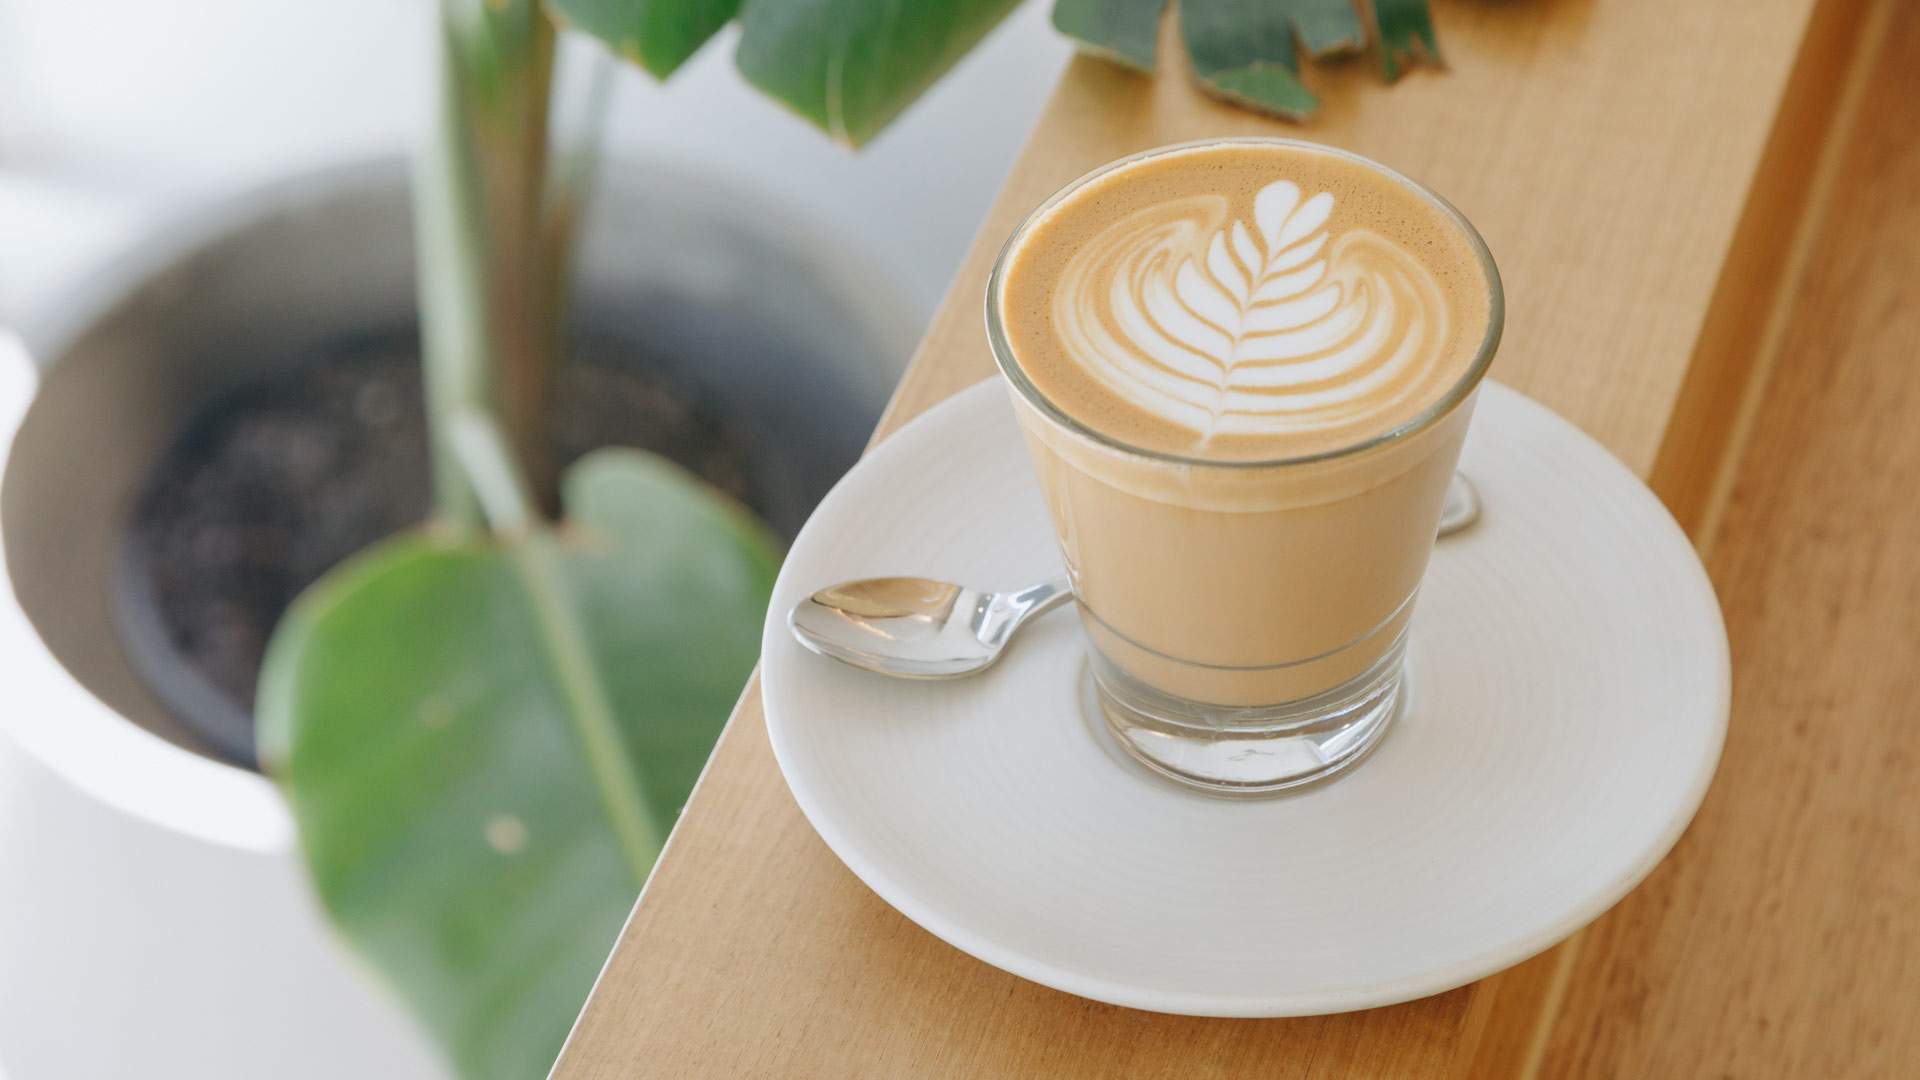 Melbourne Coffee Pioneer Industry Beans Has Opened Its First Sydney Cafe